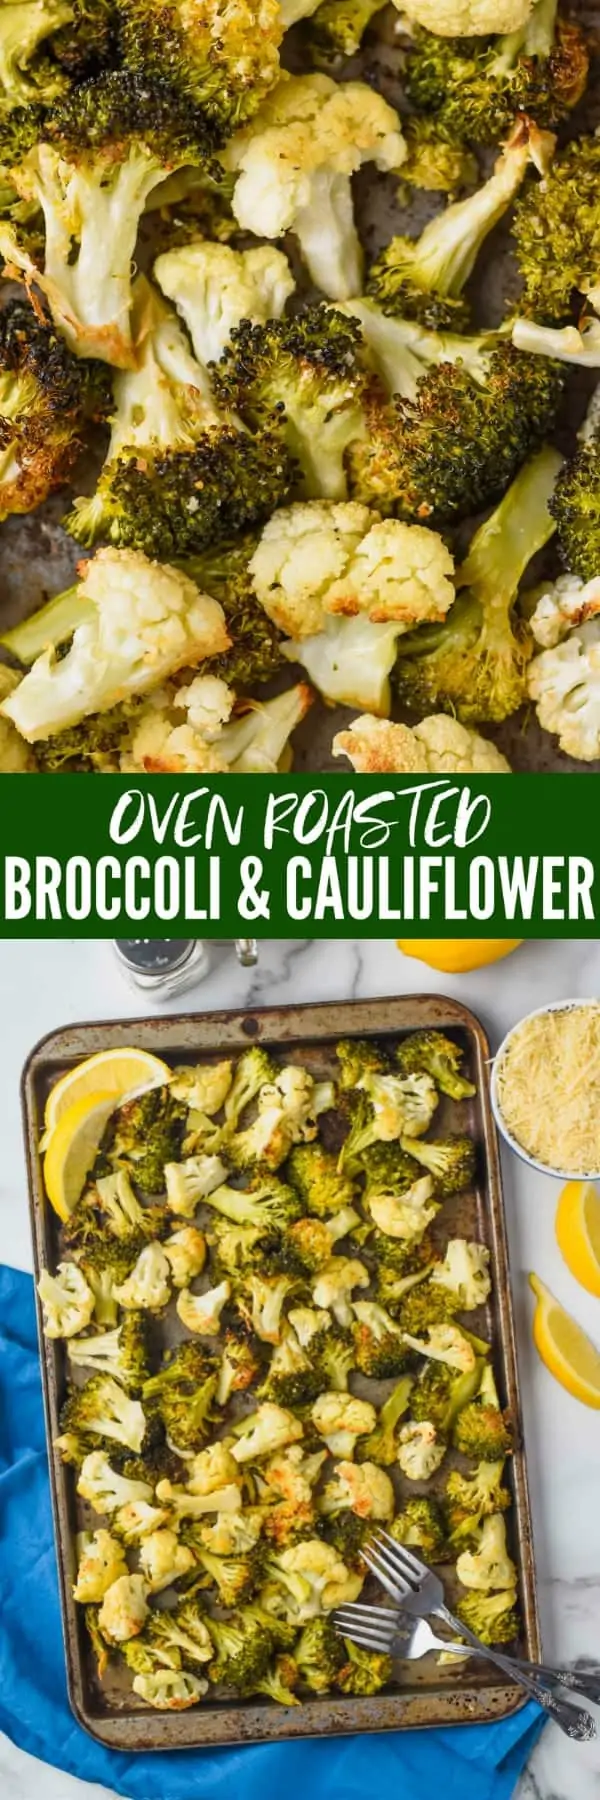 collage of photos of roasted broccoli and cauliflower